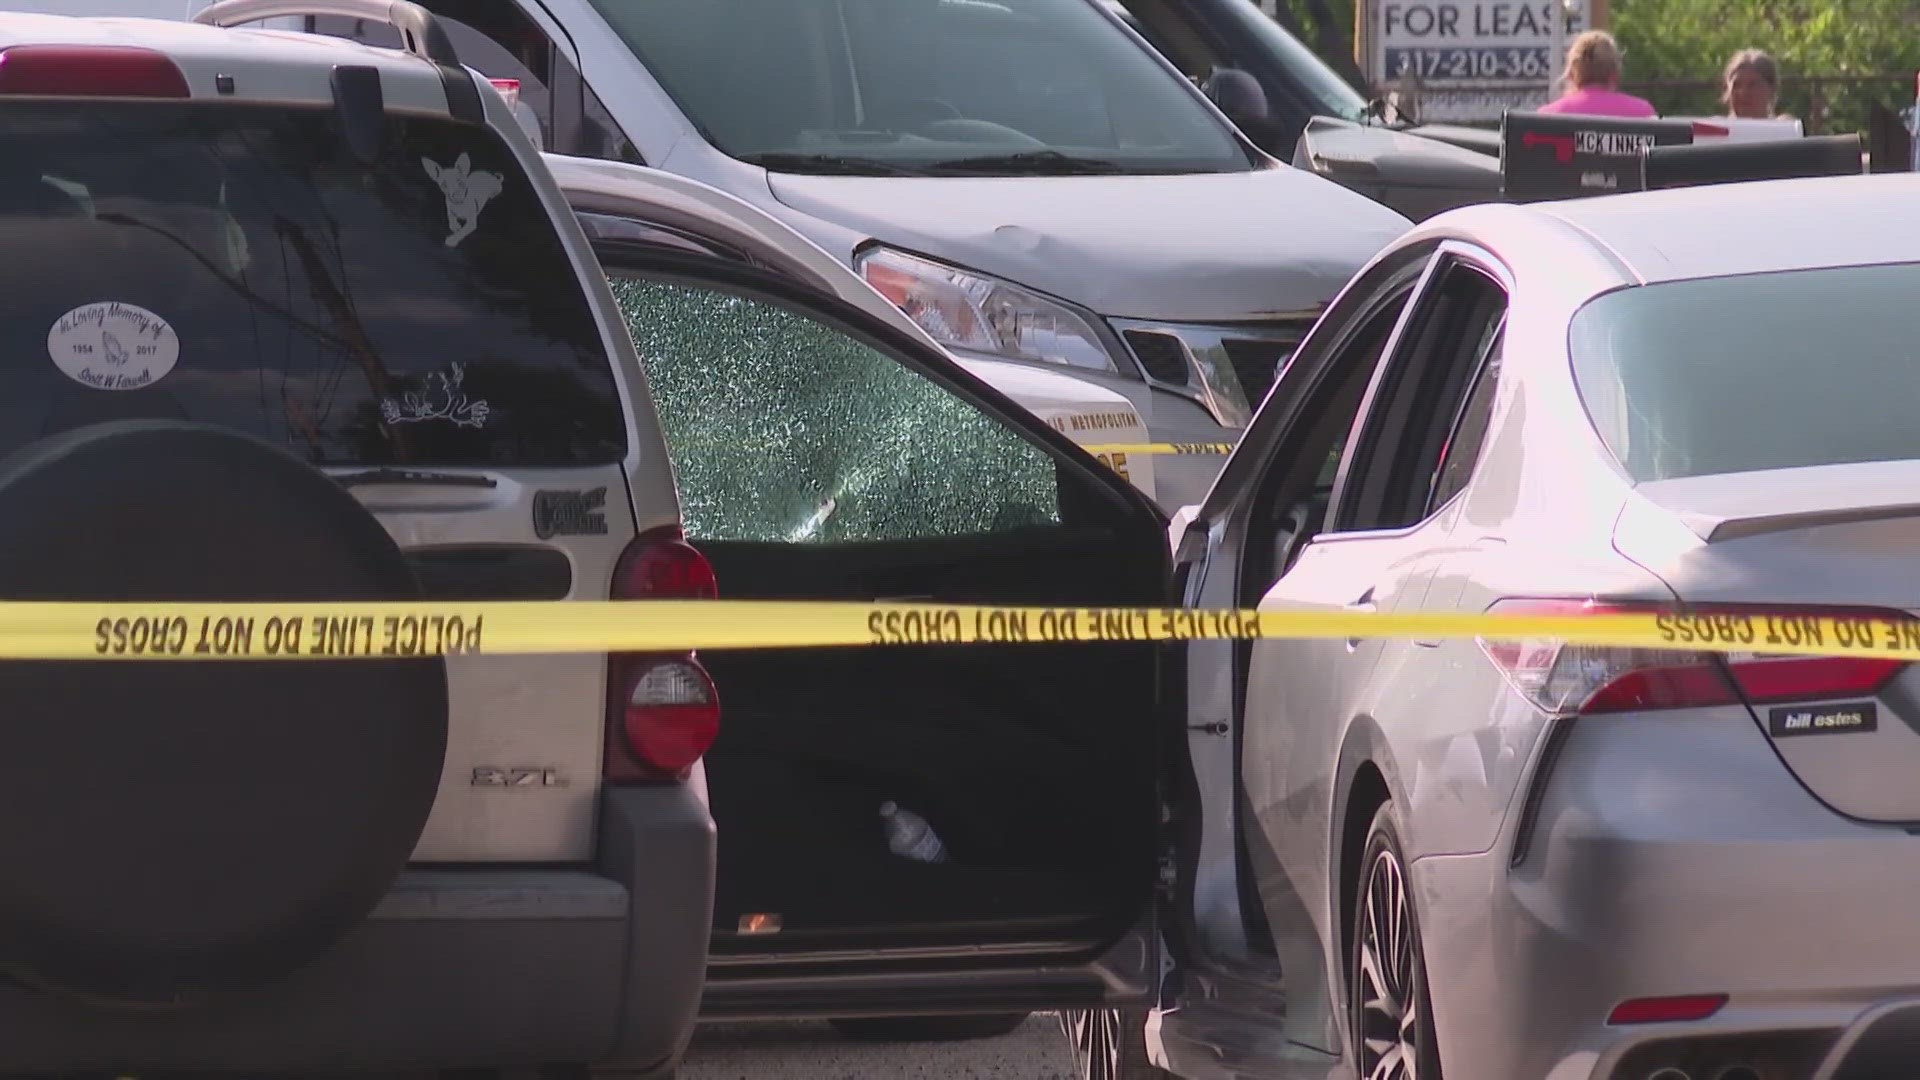 The driver of an SUV fired several shots, police said.